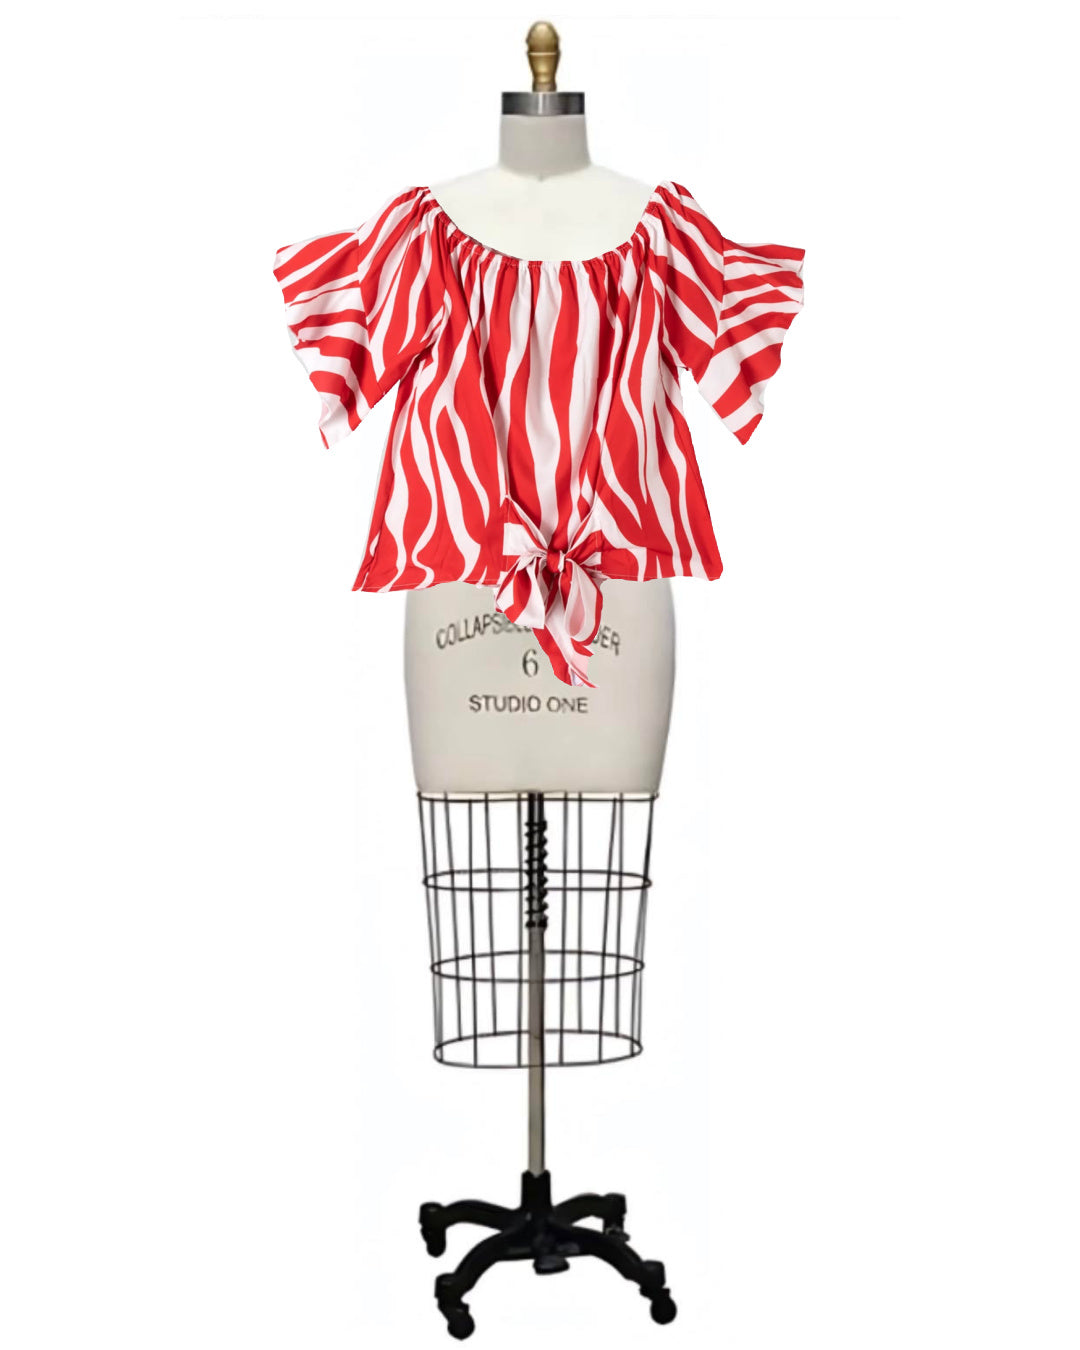 Big Top- the Circus Striped Bow Tie Blouse Plus Sizes